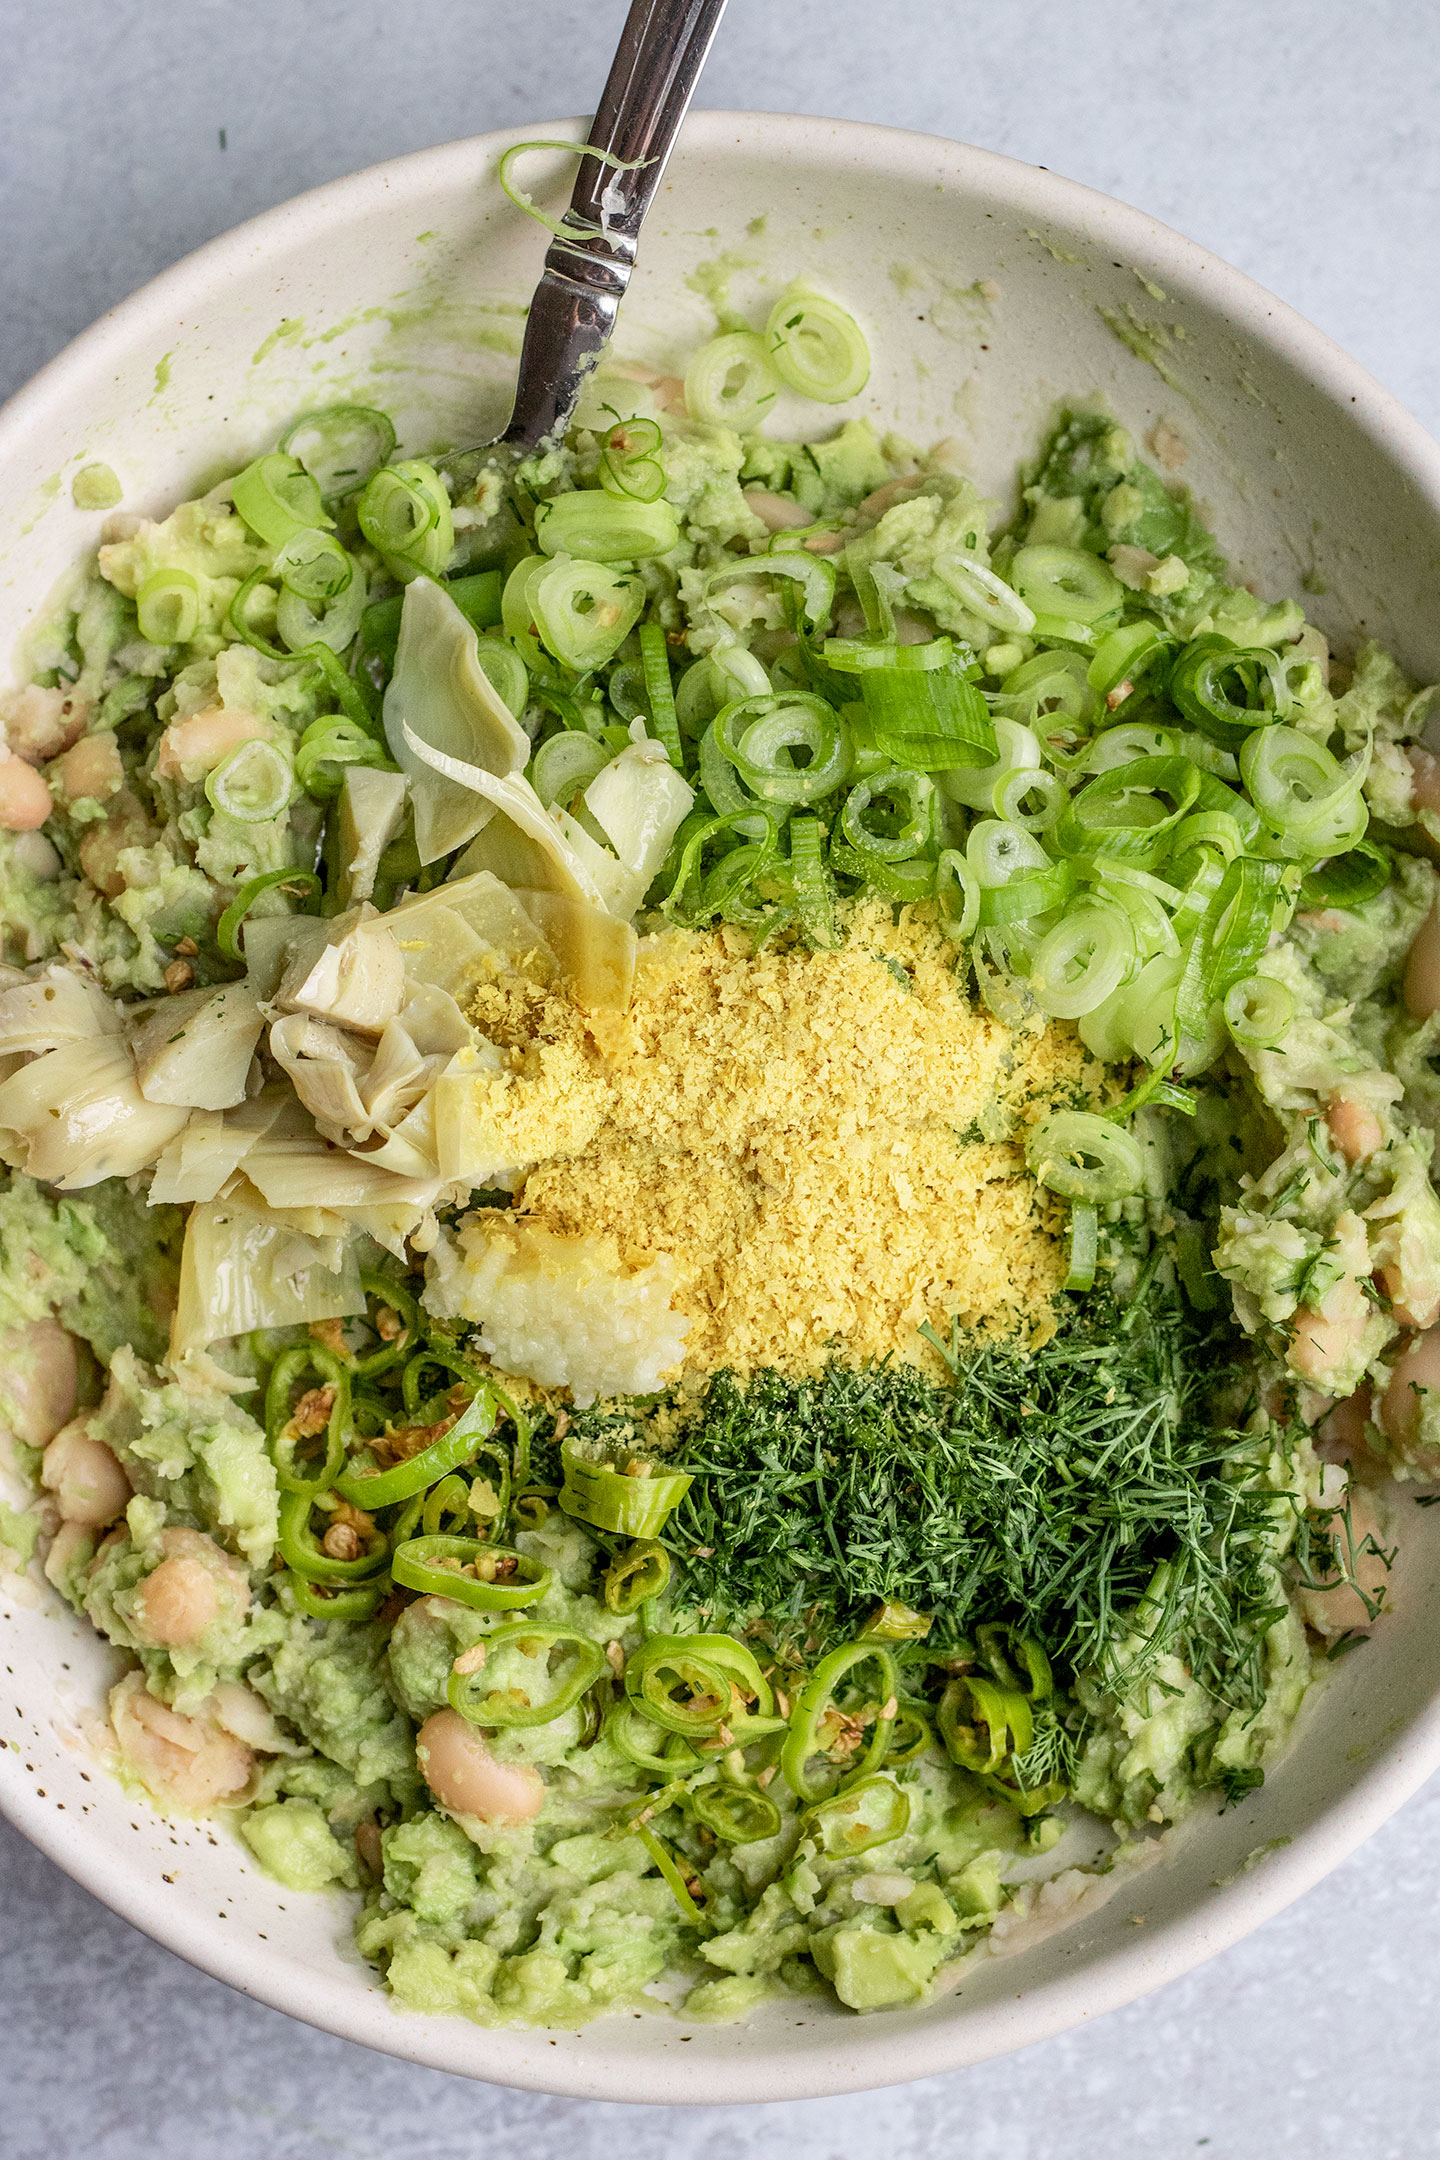 Placing dill, scallions, artichoke hearts, nutritional yeast, peppers, and lemon over top a bowl of mased white beans and avocado.